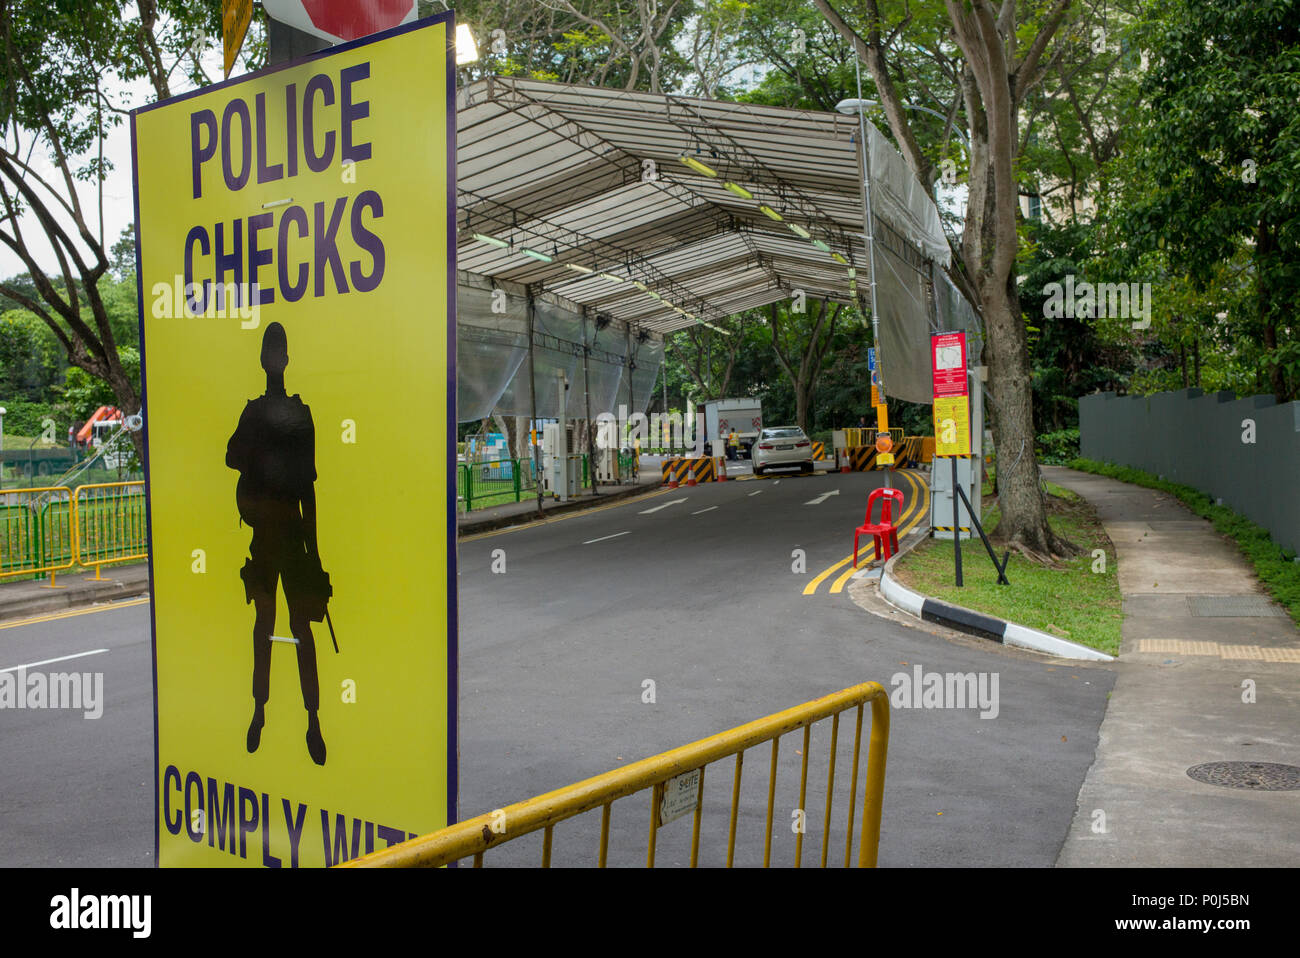 Singapore. 10 June, 2018. Security checks in the process of being set up ahead of Donald Trump's visit to Singapore for his summit with Kim Jong-un.  This area, Anderson Road, leads to the wing of the Shangrila Hotel where Trump will be staying during his visit. Credit: Richard Coulstock/Alamy Live News Stock Photo